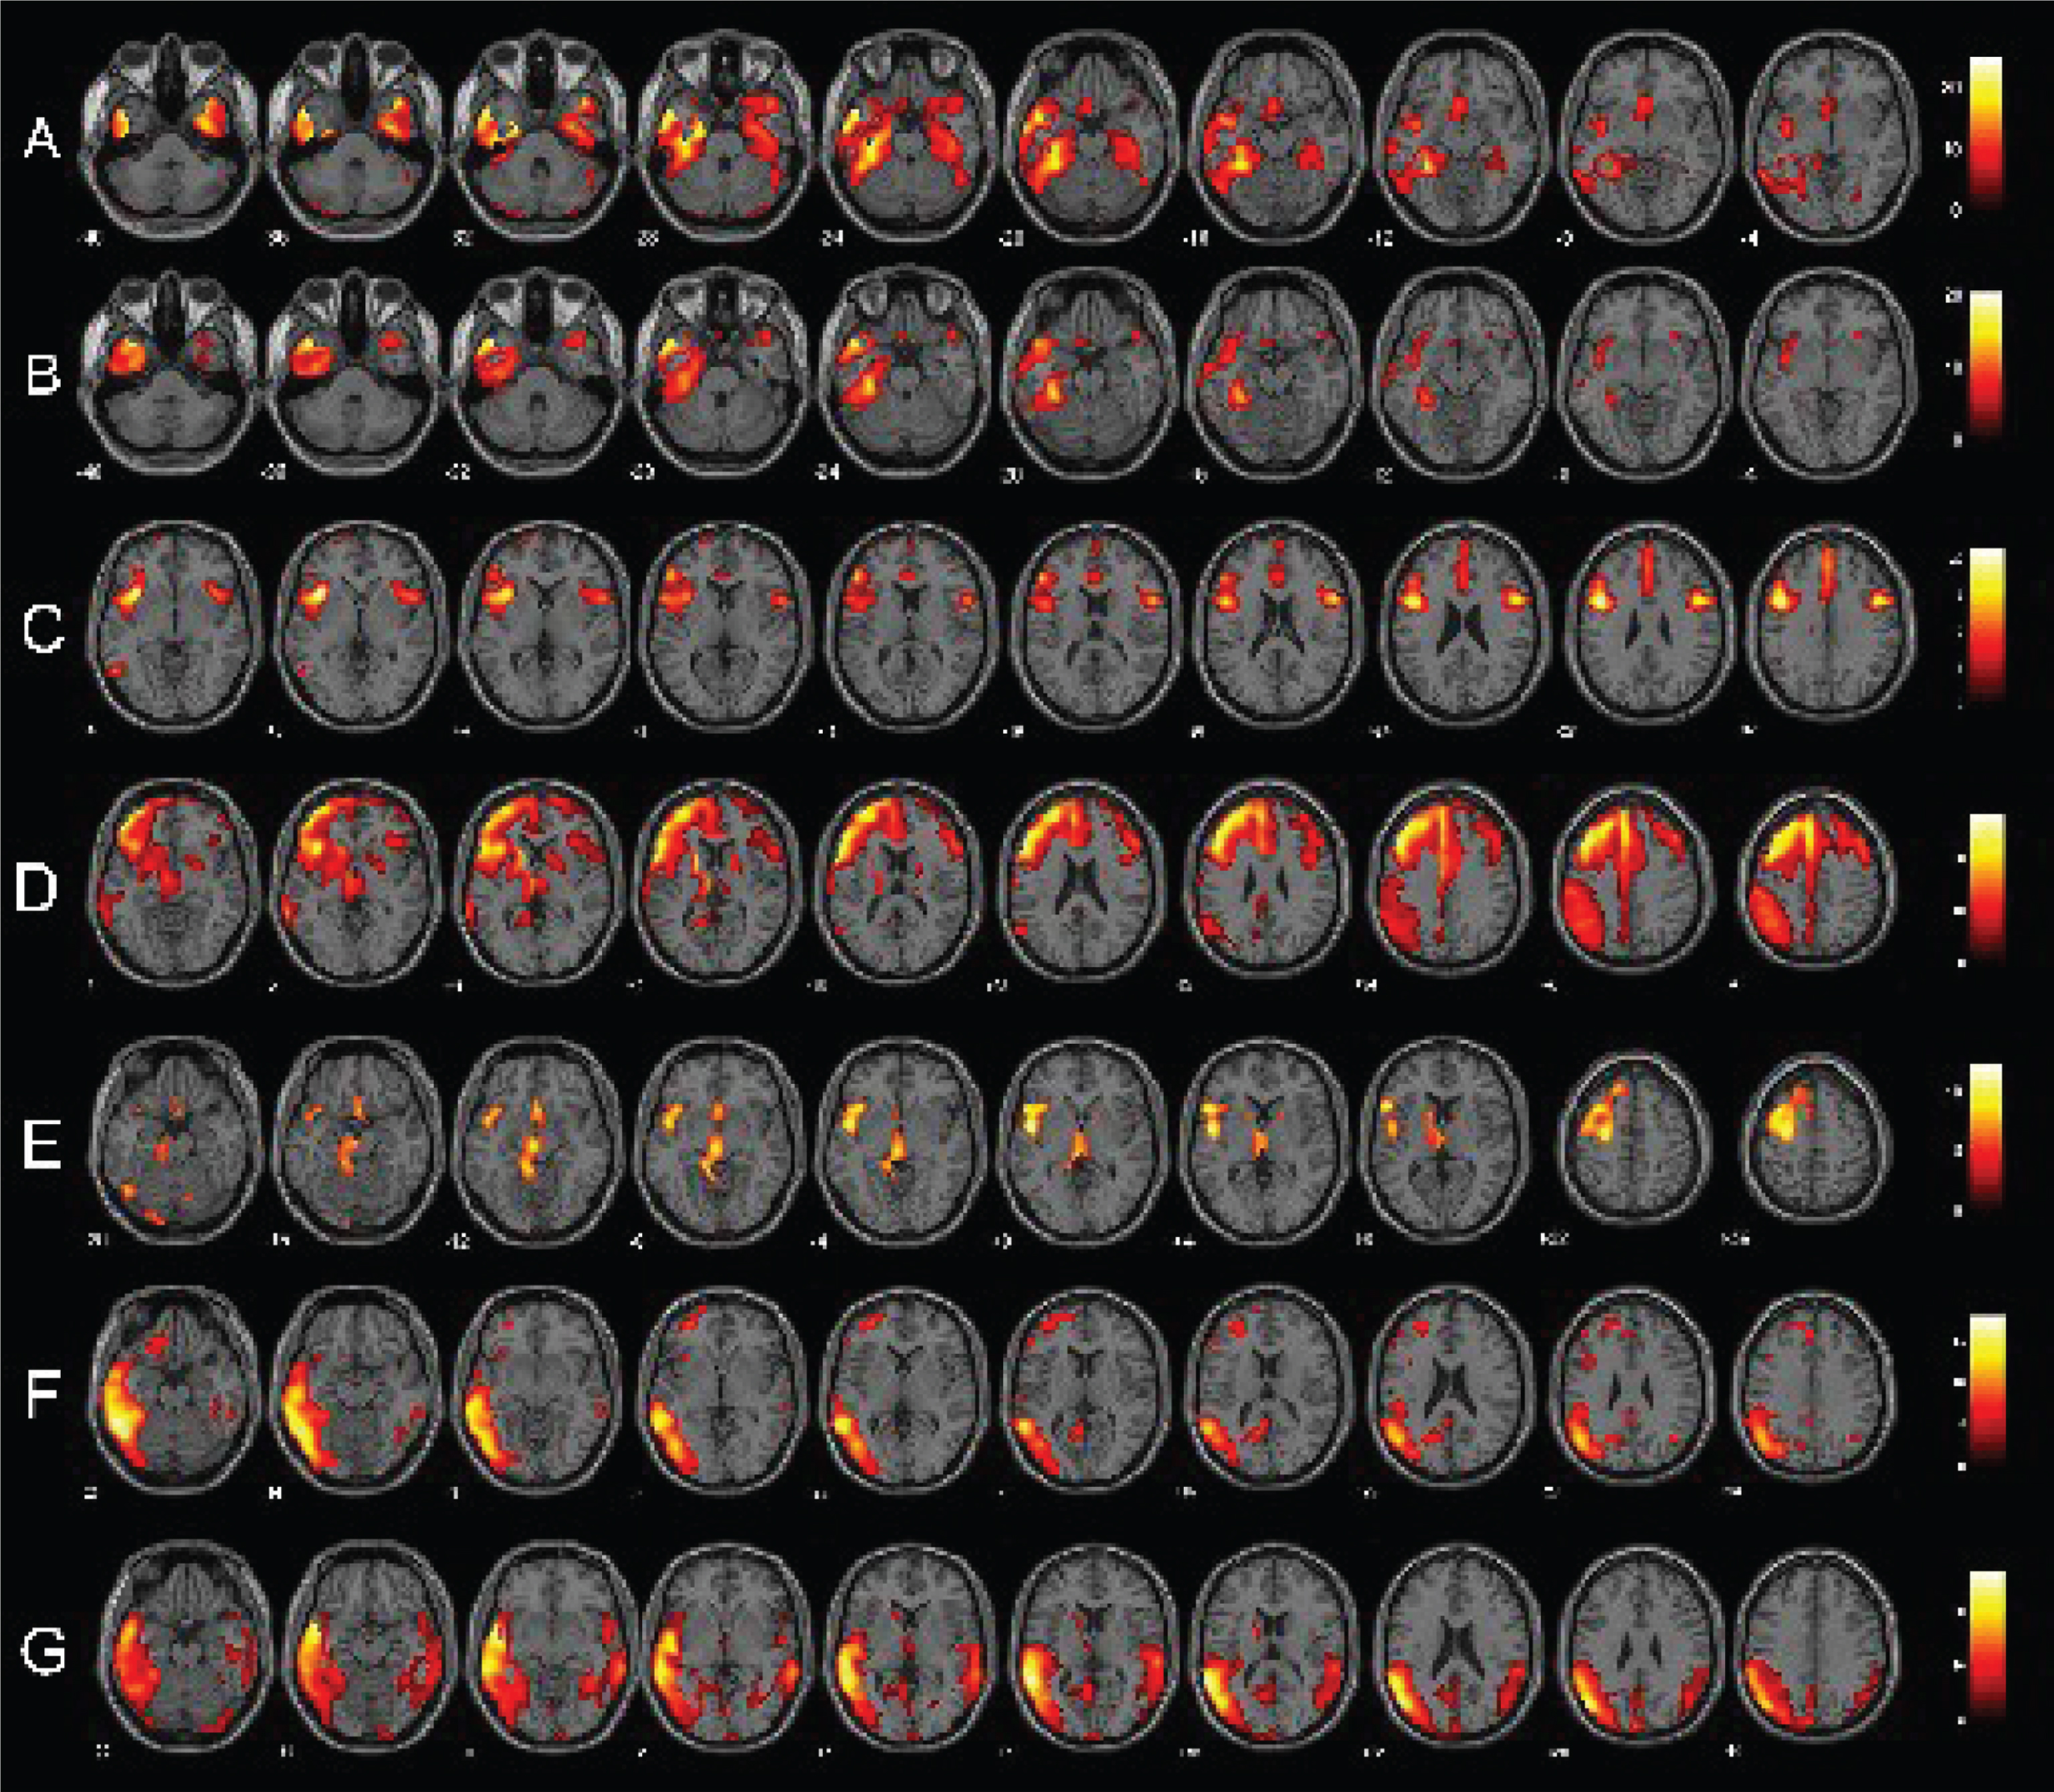 Single-subject FDG-PET SPM t-maps of PPA patients. Panels A and B show respectively a bilateral and a left-predominant pattern of anterior temporal hypometabolism in two sv-PPA patients. Panels C, D, and E represent respectively patterns of pure nfv-PPA, nfv-PPA classified as CBD and as PSP at the follow-up. Finally, panels F and G show lv-PPA with a left-predominant and a bilateral pattern of hypometabolism. FDG-PET SPM brain hypometabolism patterns are shown in axial view, p < 0.001 uncorrected.